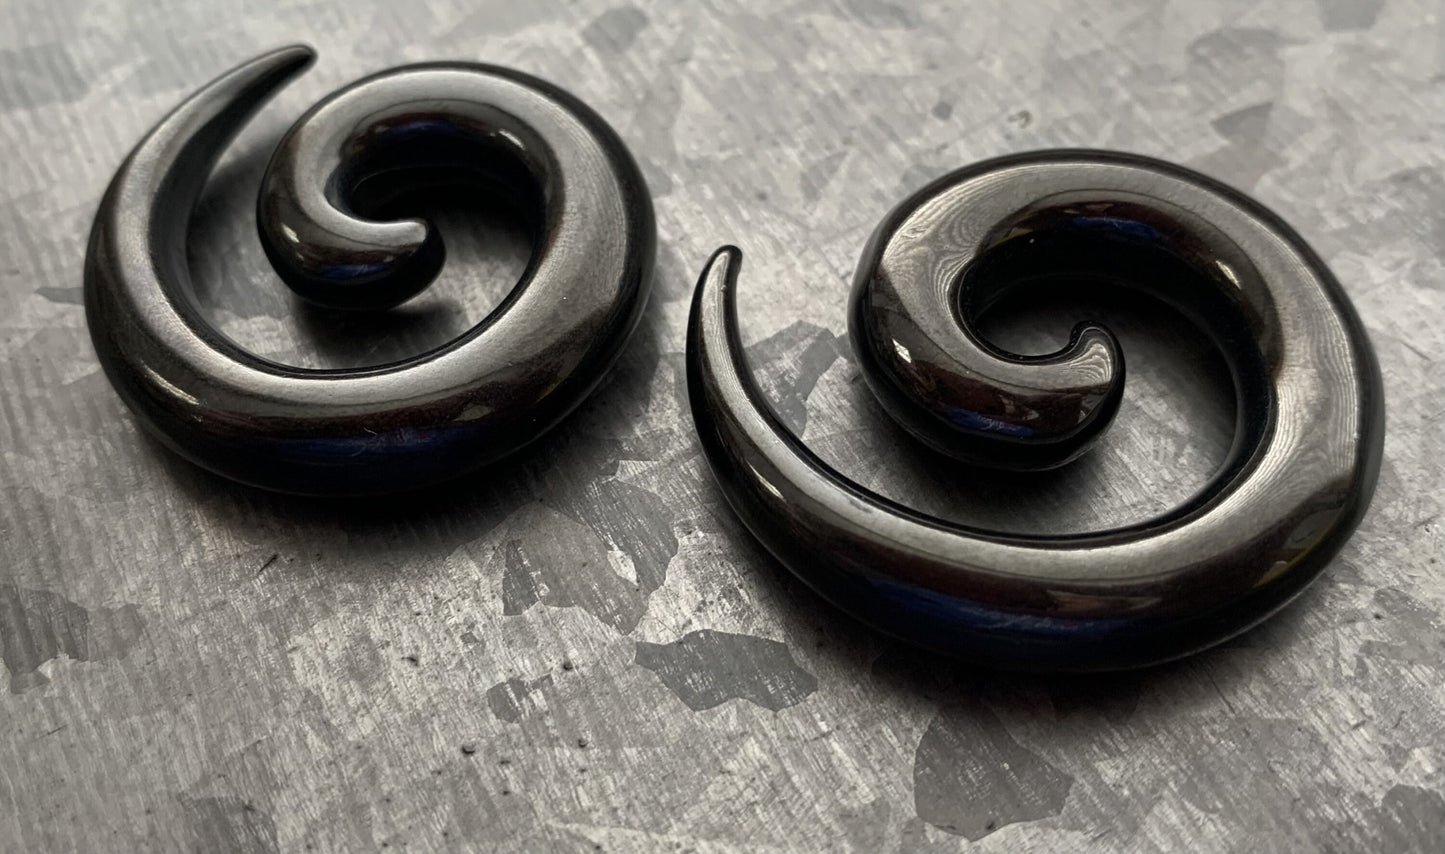 PAIR of Unique Stainless Steel Spiral Tapers Expanders - Black, Gold or Rainbow - Gauges 12g (2mm) thru 2g (6mm) available!